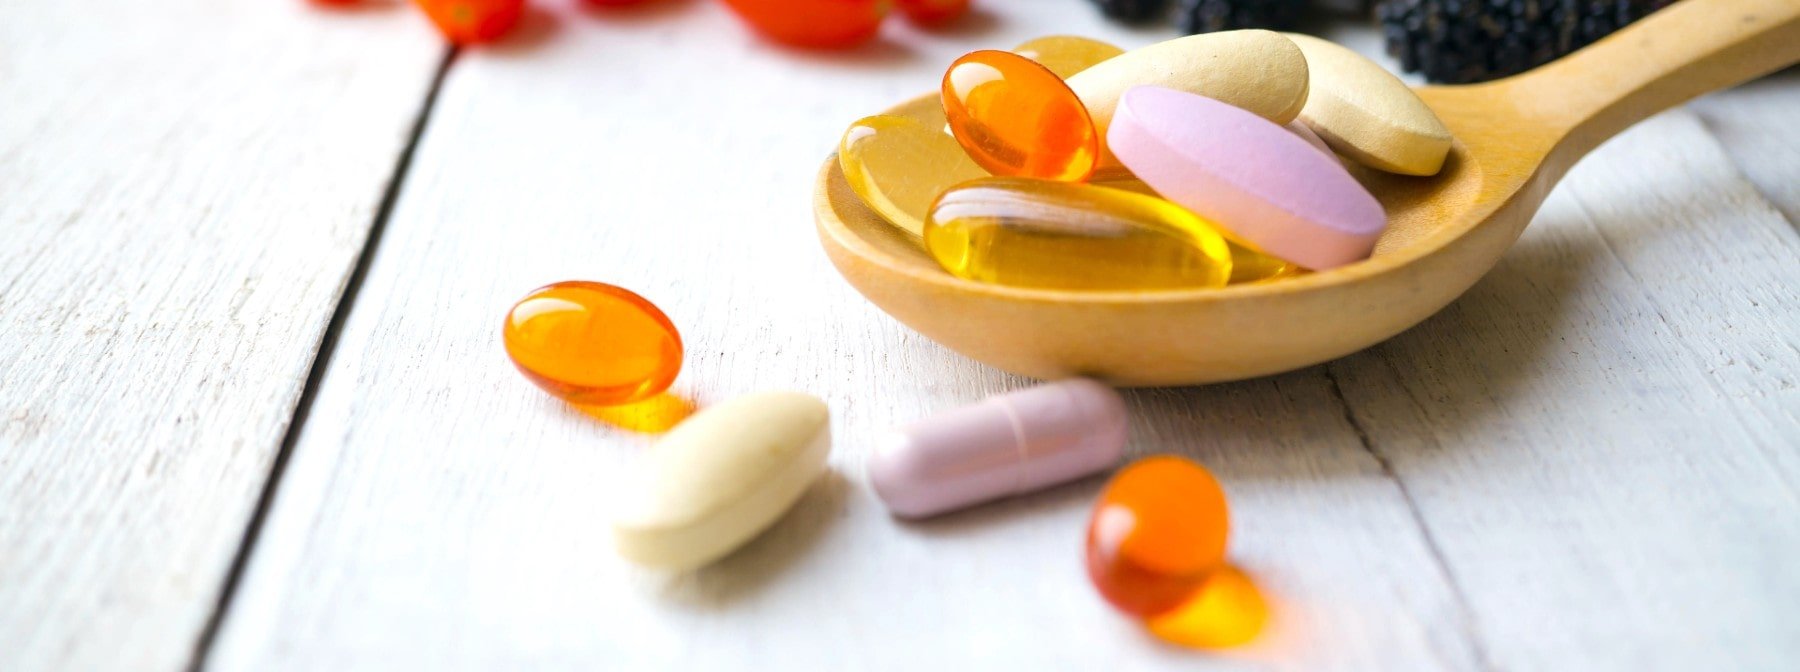 Top 5 Supplements For Weight Loss